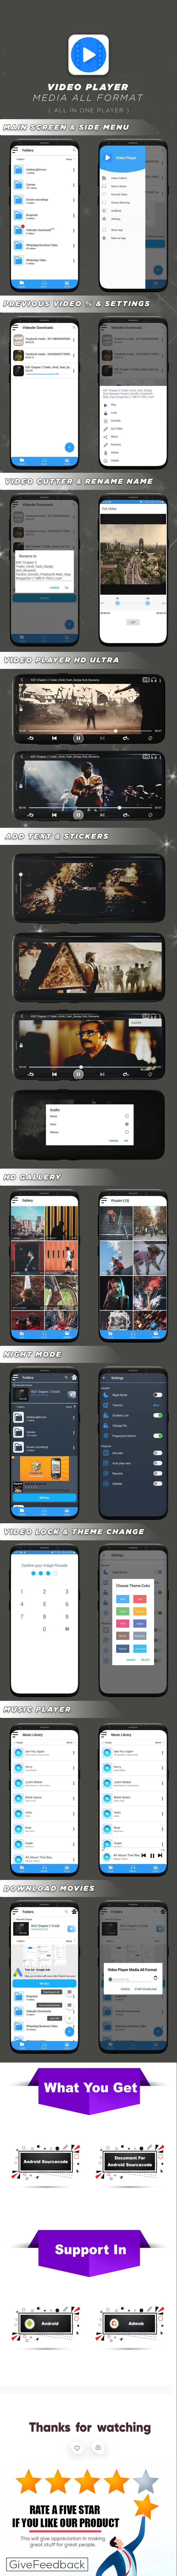 Video Player Media All Format, Music player, Photo Gallery & Album, Max Video Player HD - 4